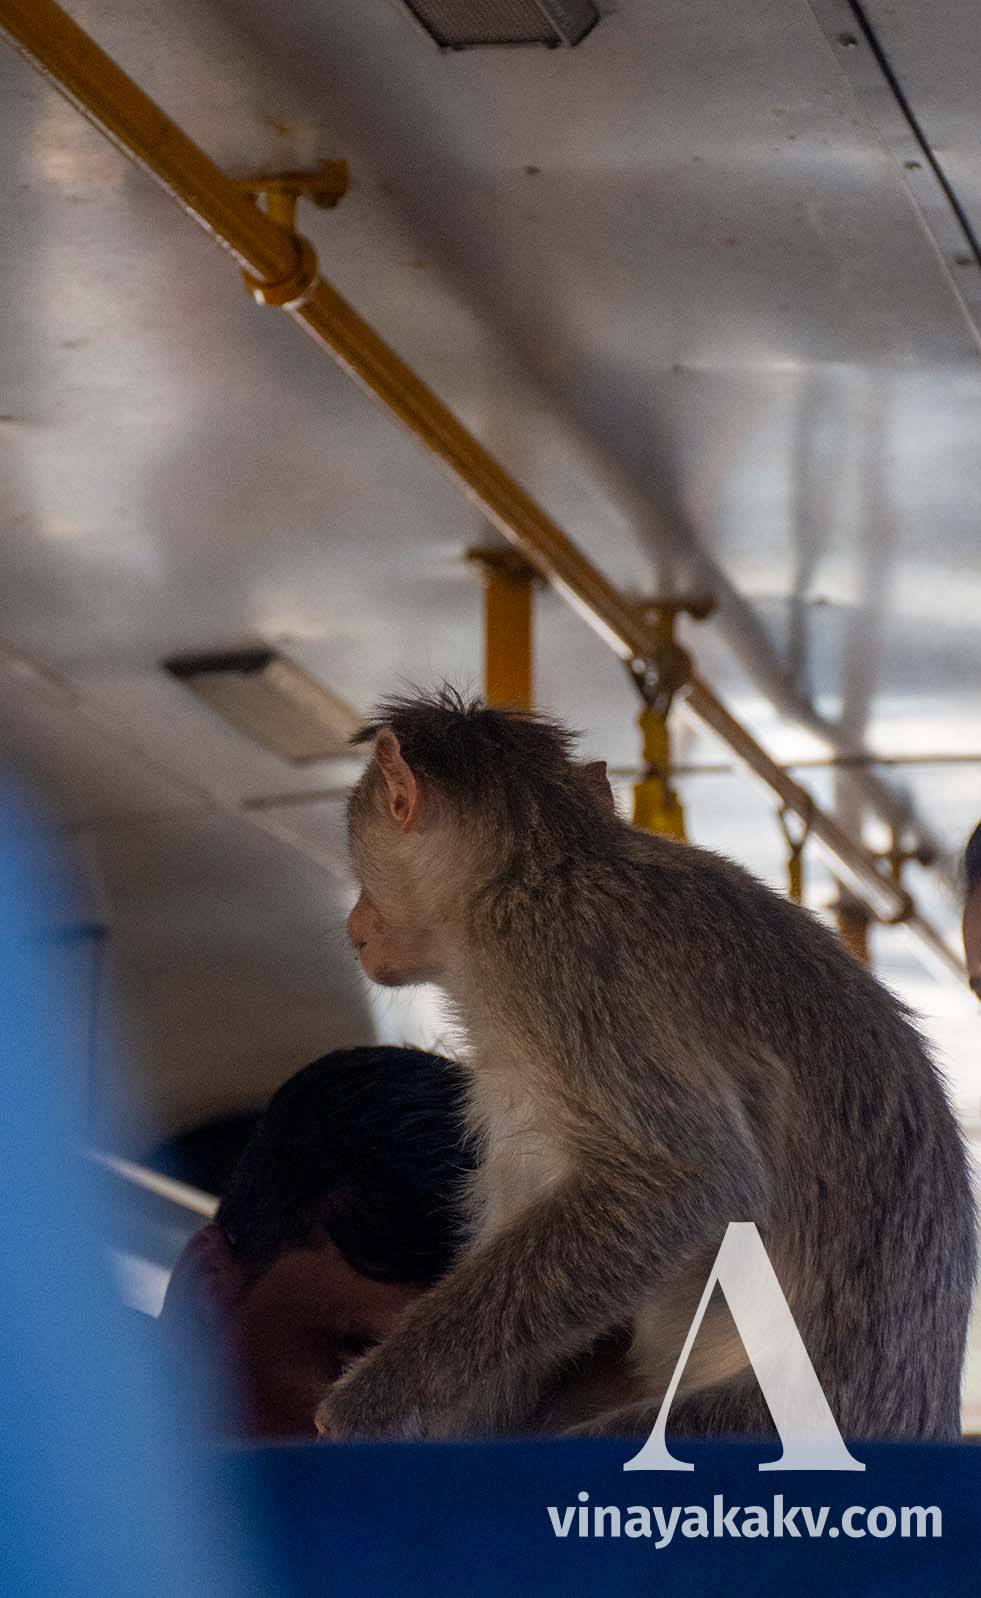 A monkey in the bus. It is not a passenger, though!